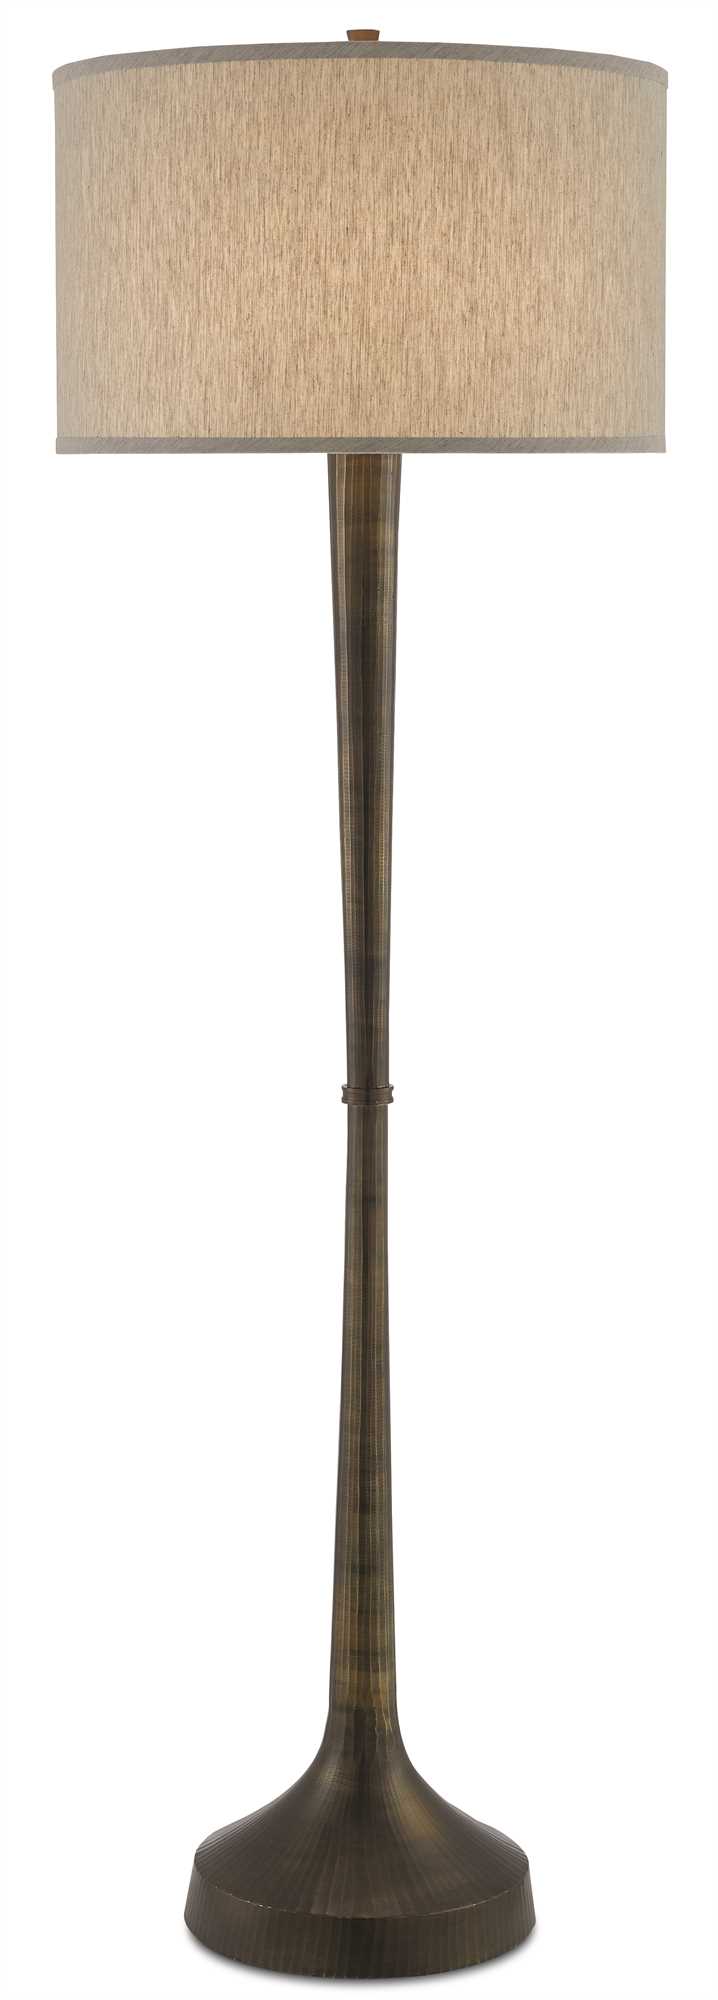 Currey and Company Luca Floor Lamp 8000-0033